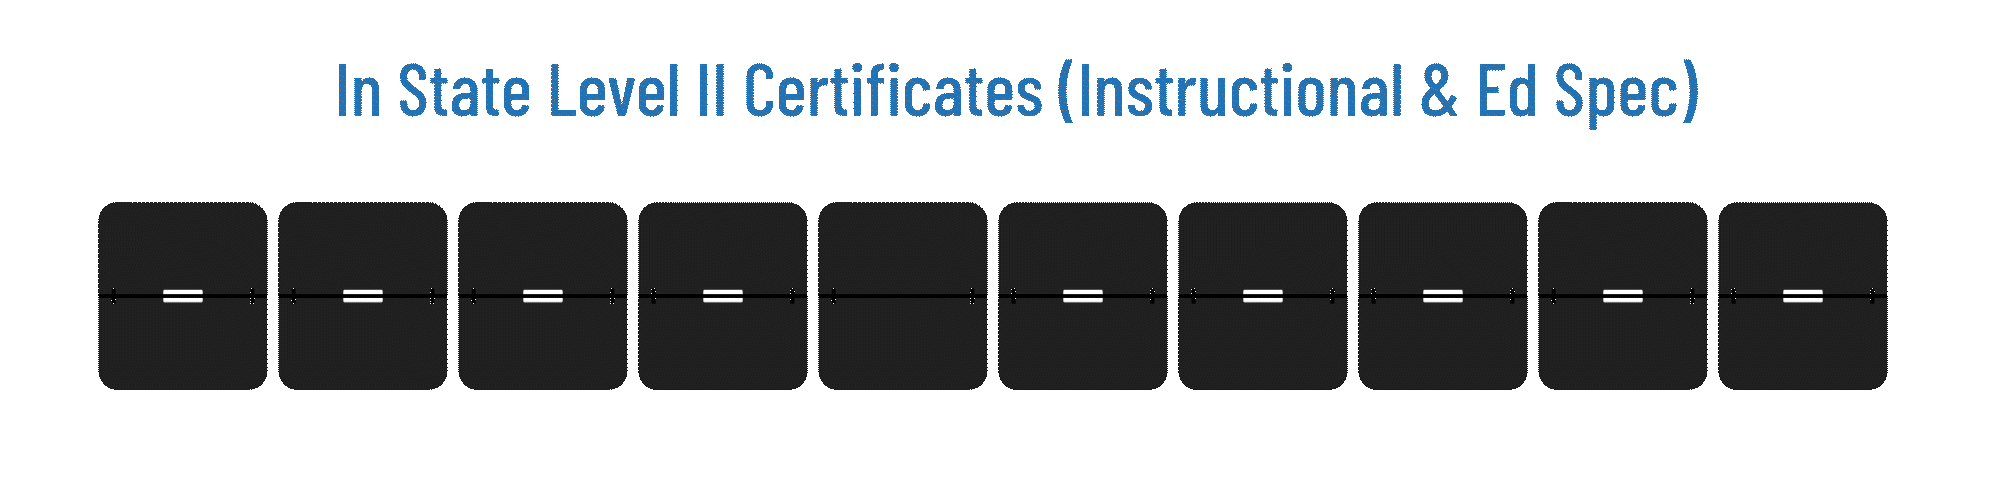 Level II Certificates (Instructional & Ed Spec) - less than 2 weeks